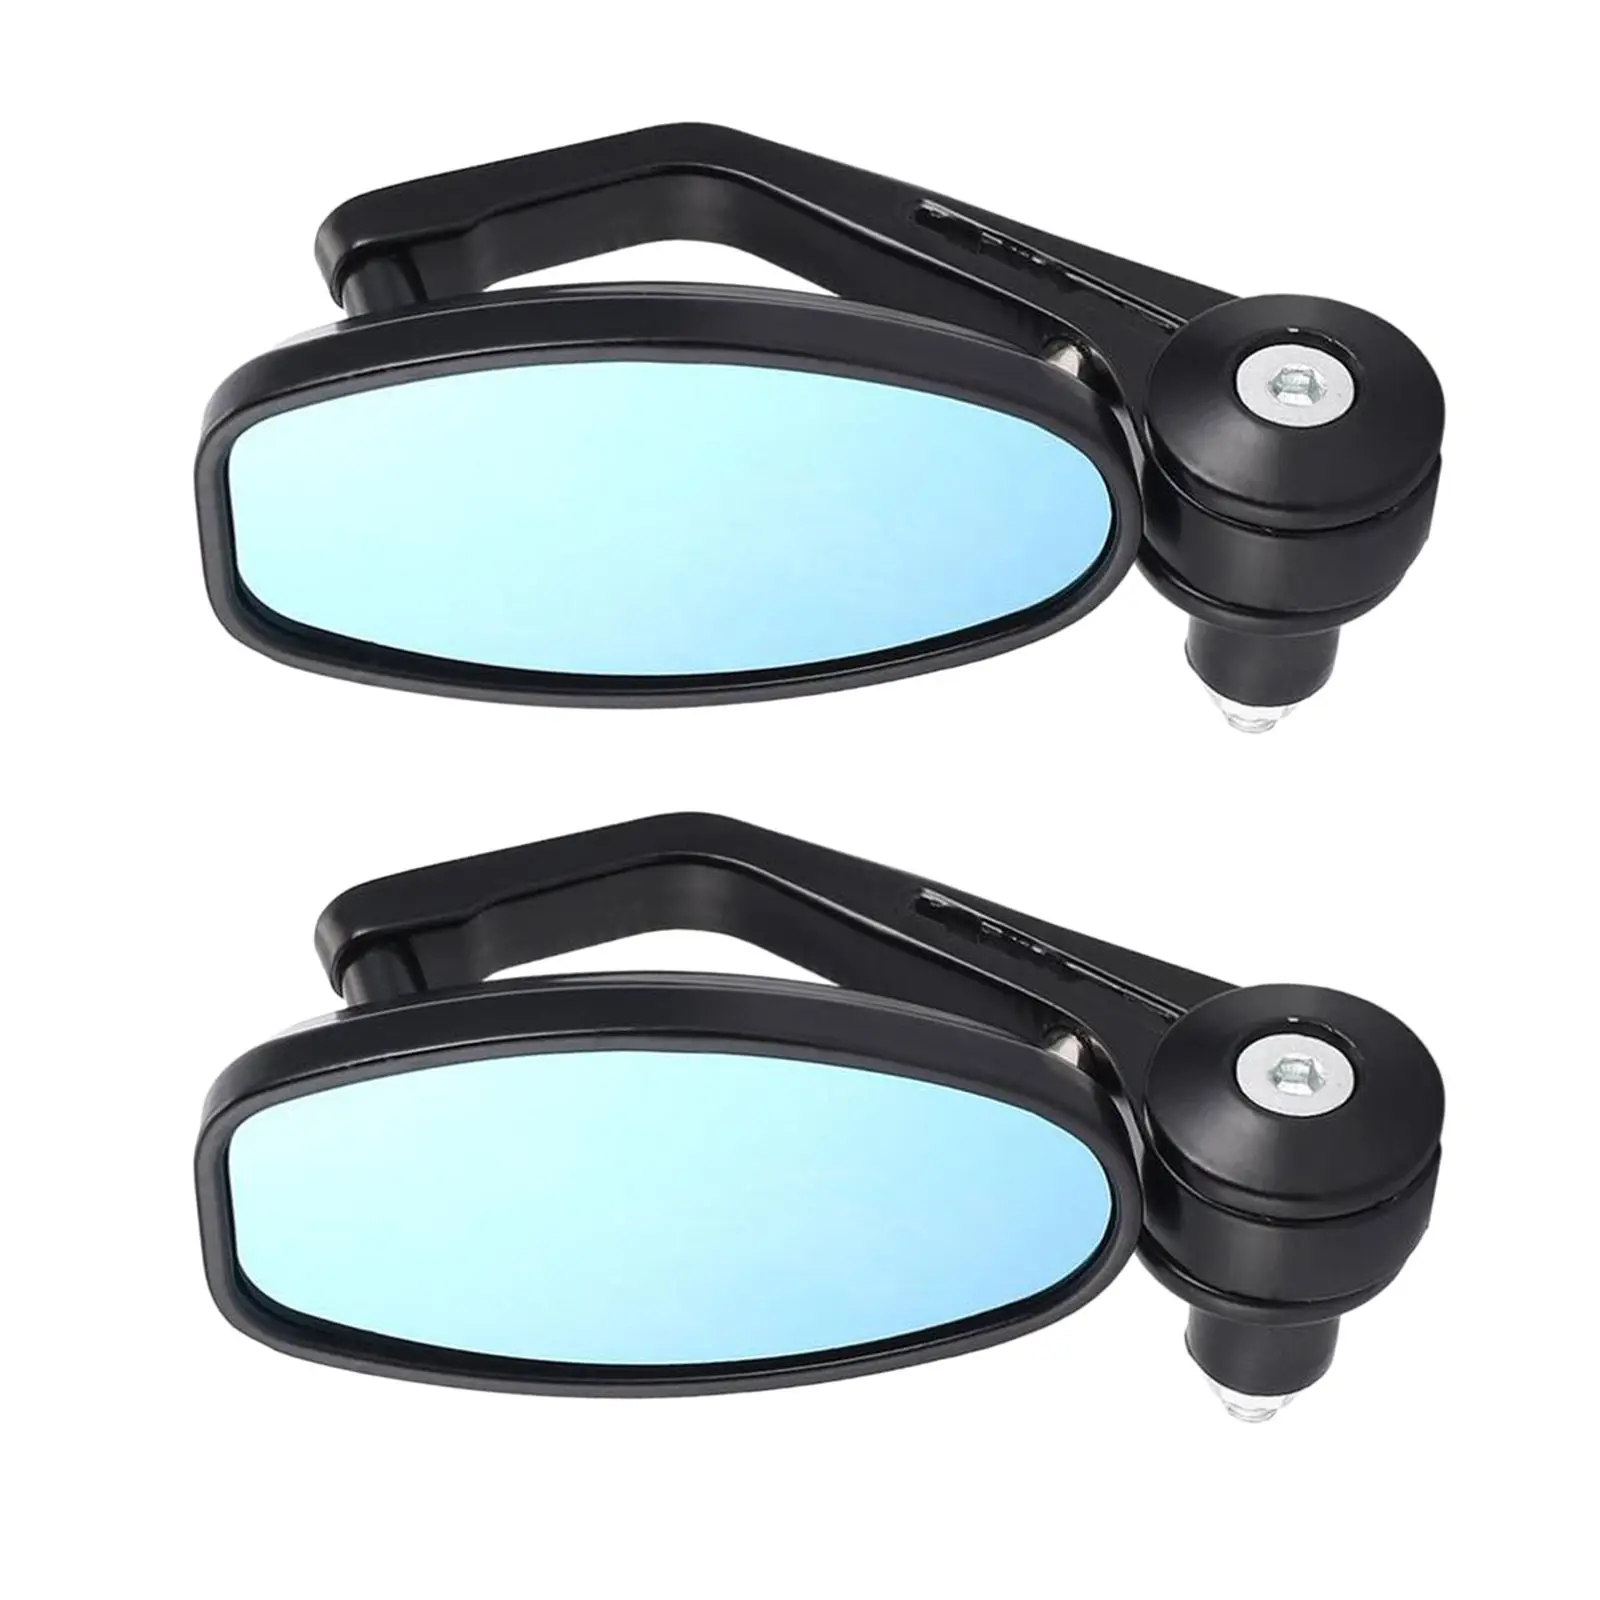 1 Pair Rear View Mirrors Bar End Balck Universal 7/8 Handlebar Side Mirrors Fits Most for Motorbike